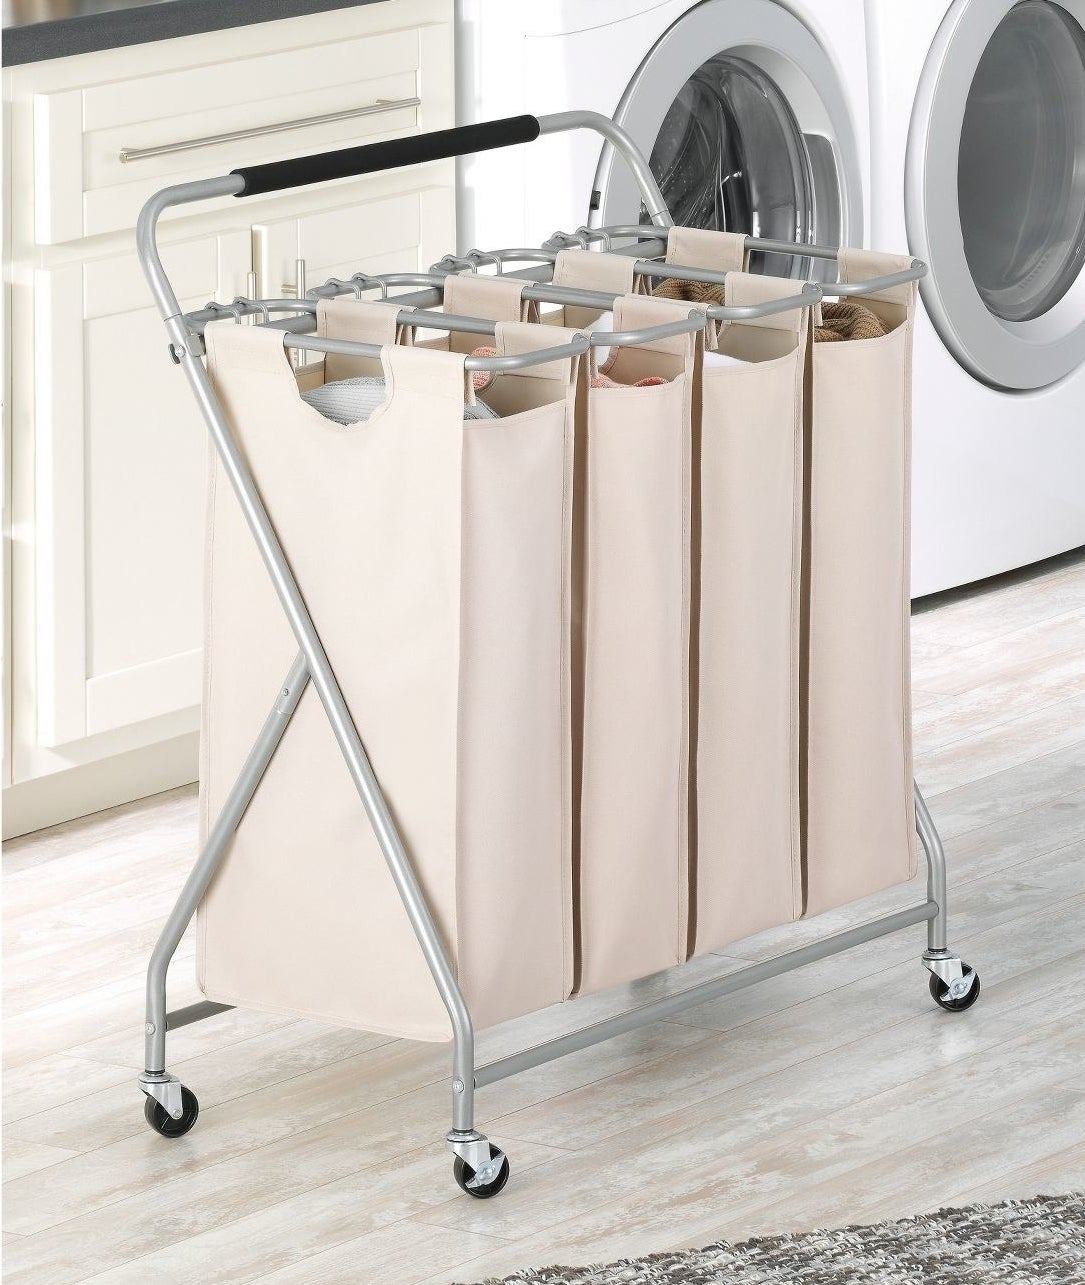 The sorter, which was four beige bags, hanging by velcro from the metal, wheeled frame, which has a padded handle